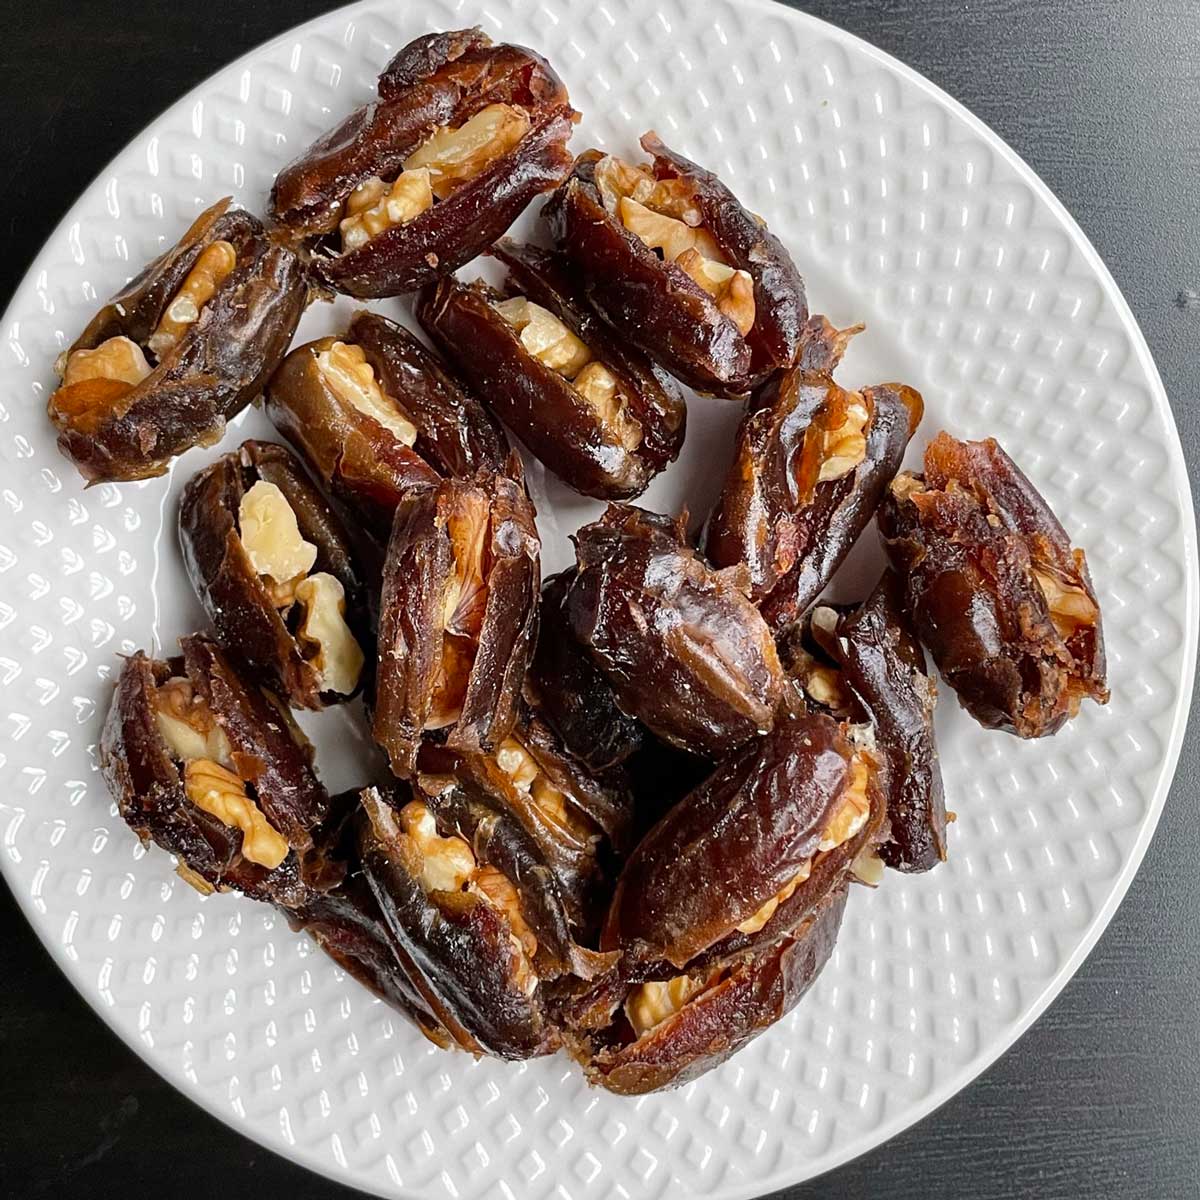 Dates filled with walnuts.